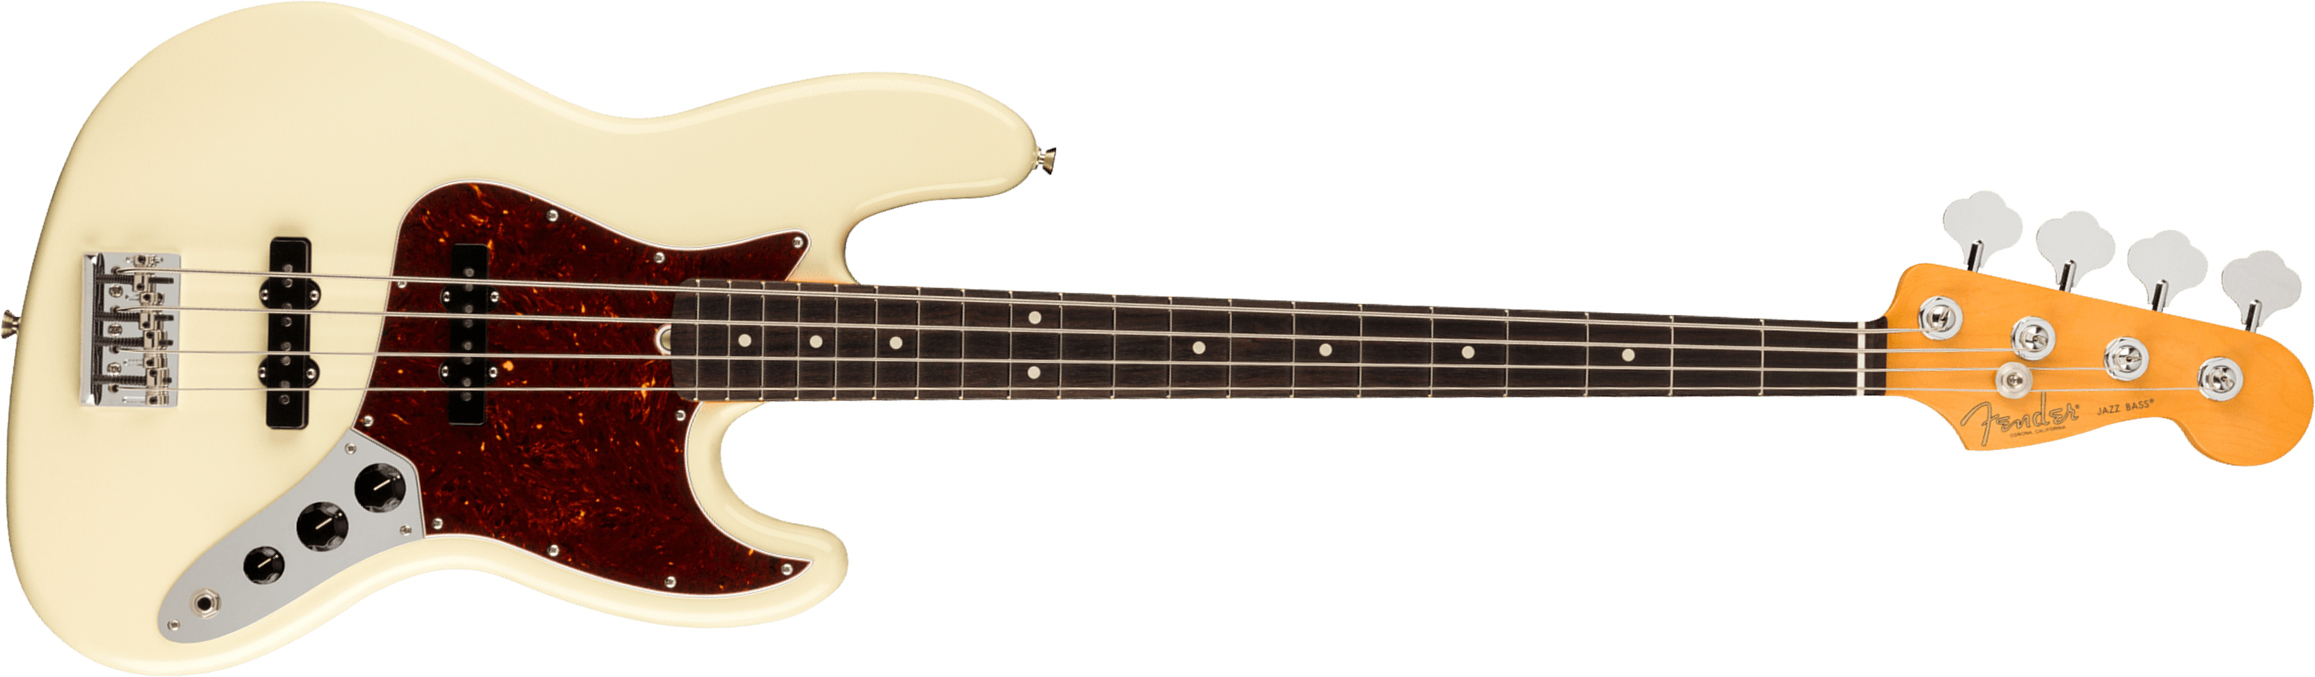 Fender Jazz Bass American Professional Ii Usa Rw - Olympic White - Basse Électrique Solid Body - Main picture